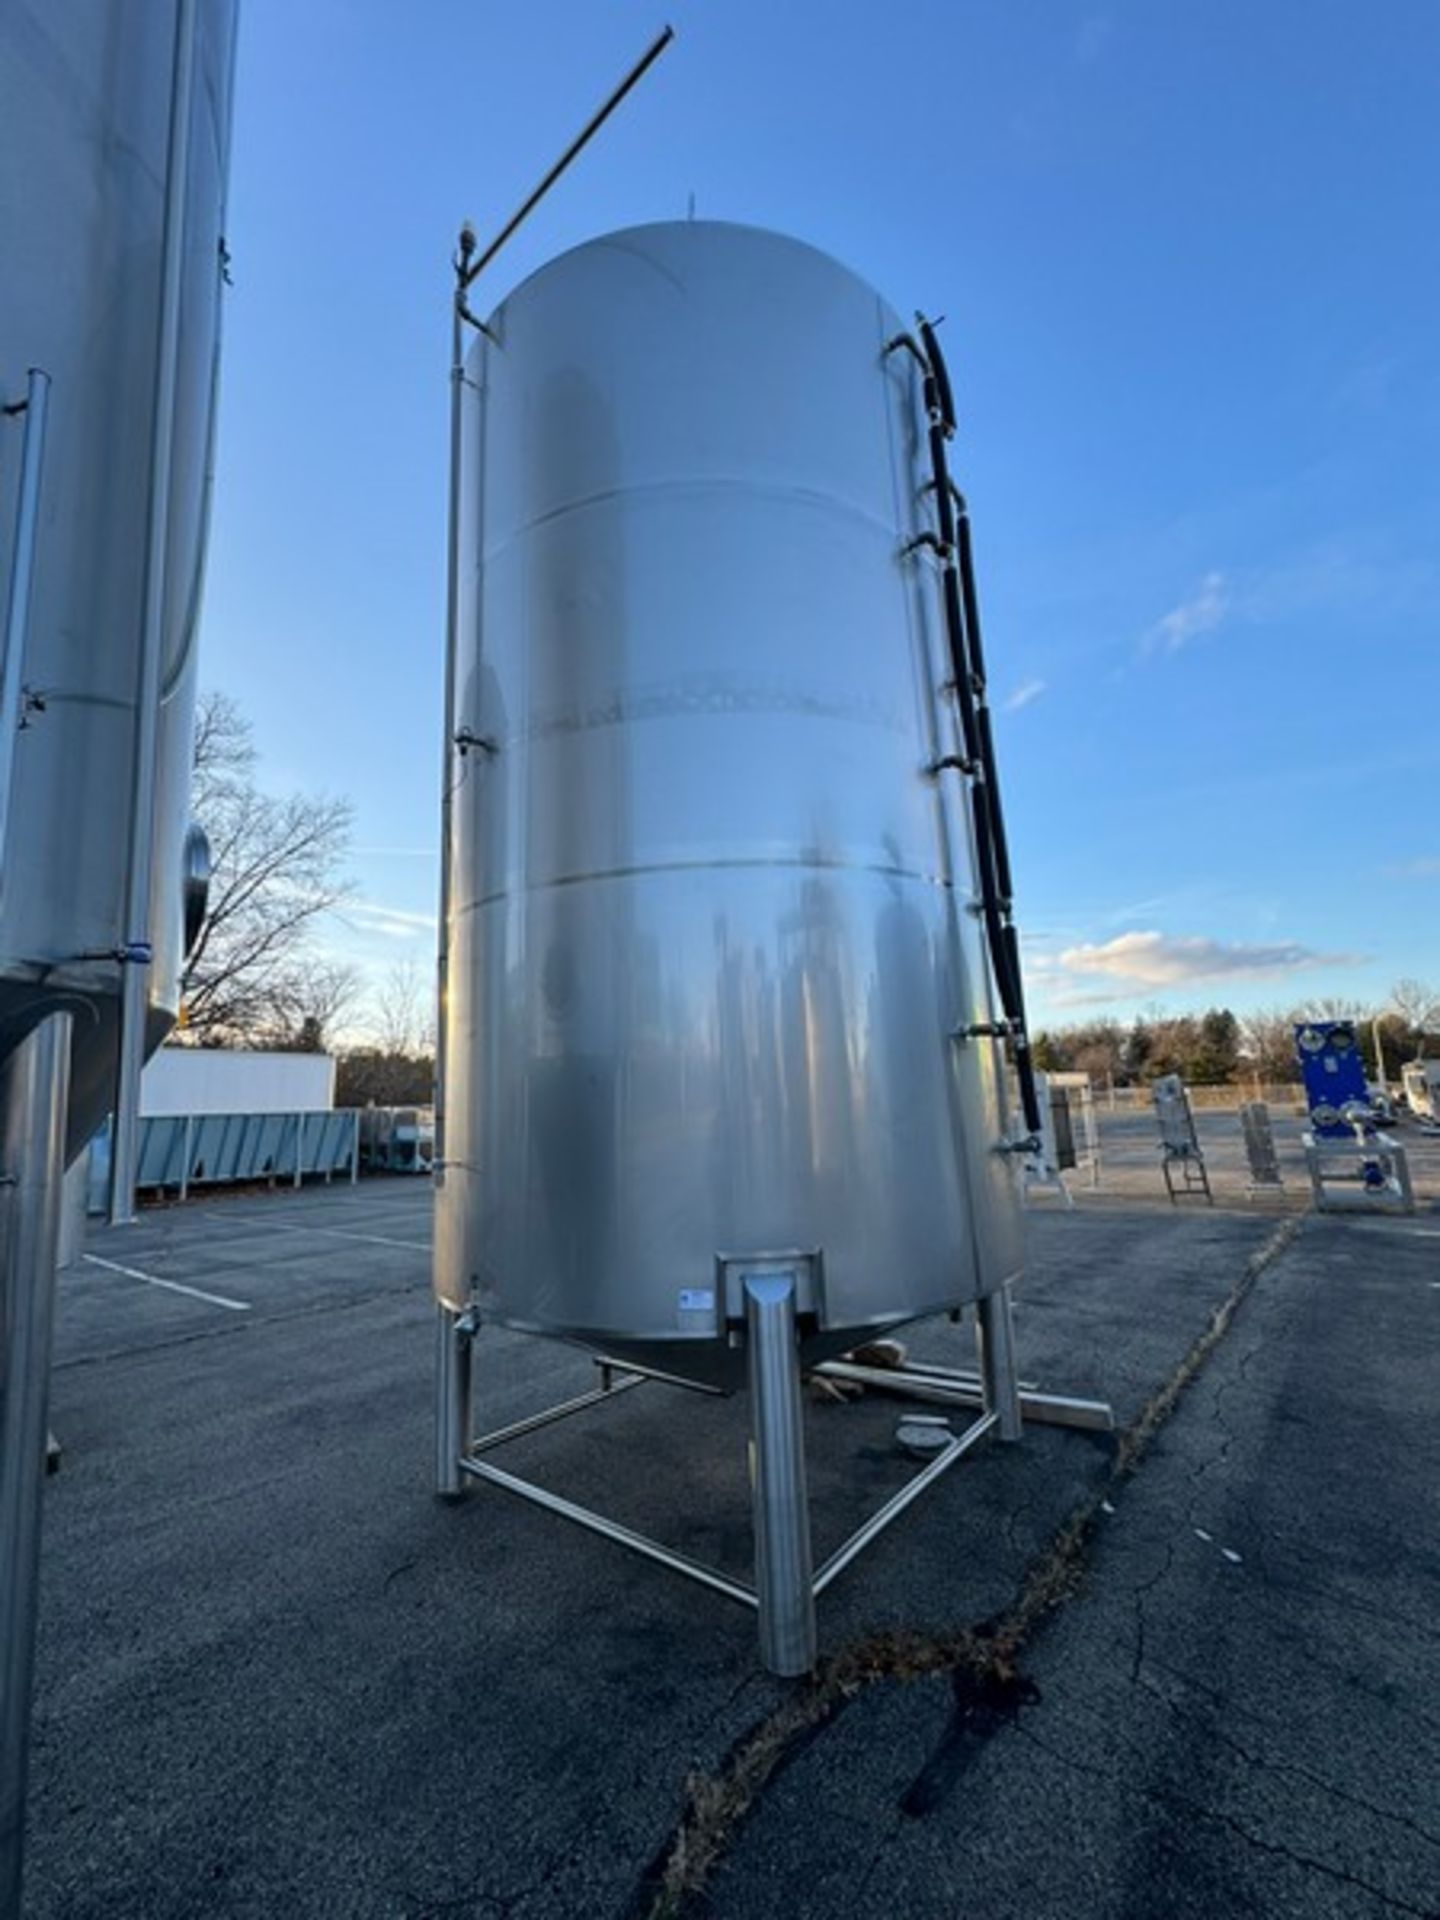 2012 Specific Mechanical Systems 200 BBL Capacity S/S Cold Liquor Tank, S/N RMP-136-12-300, with S/S